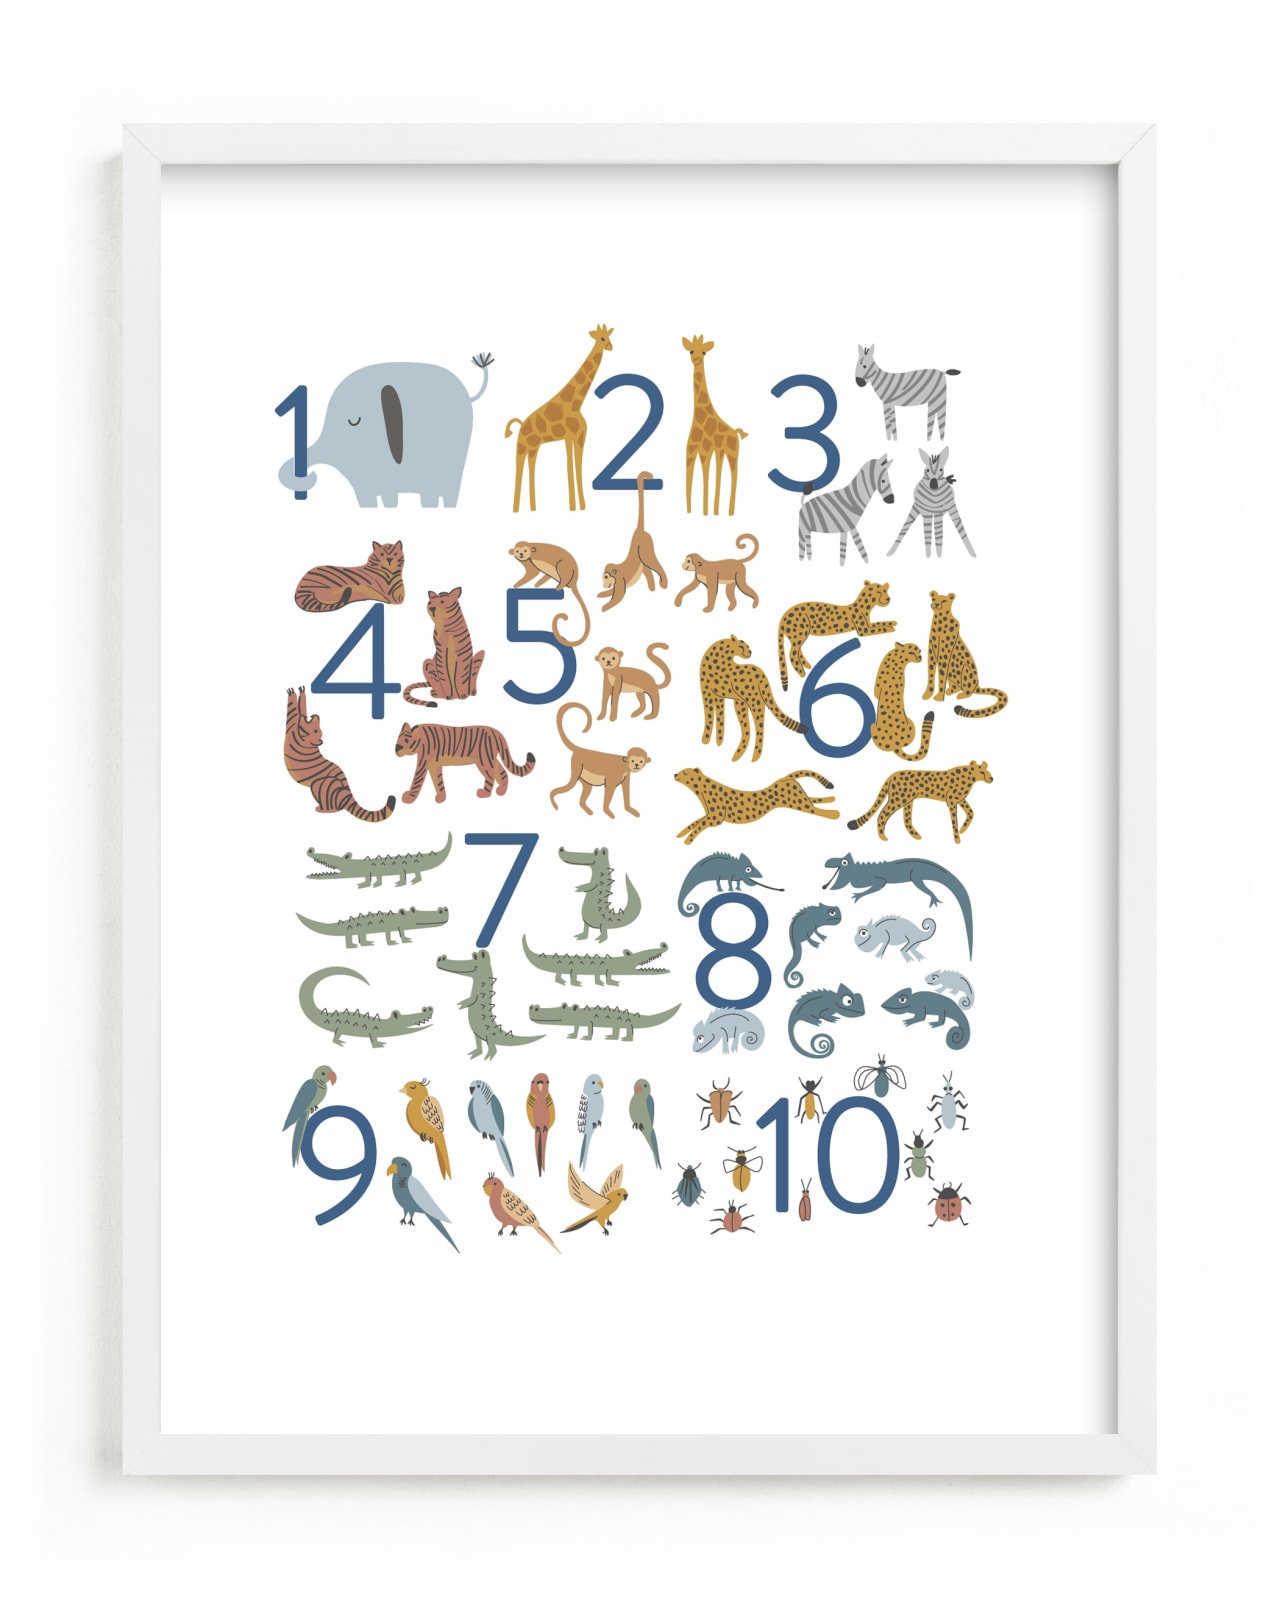 numbers 1-10, represented by quantity of wild animals